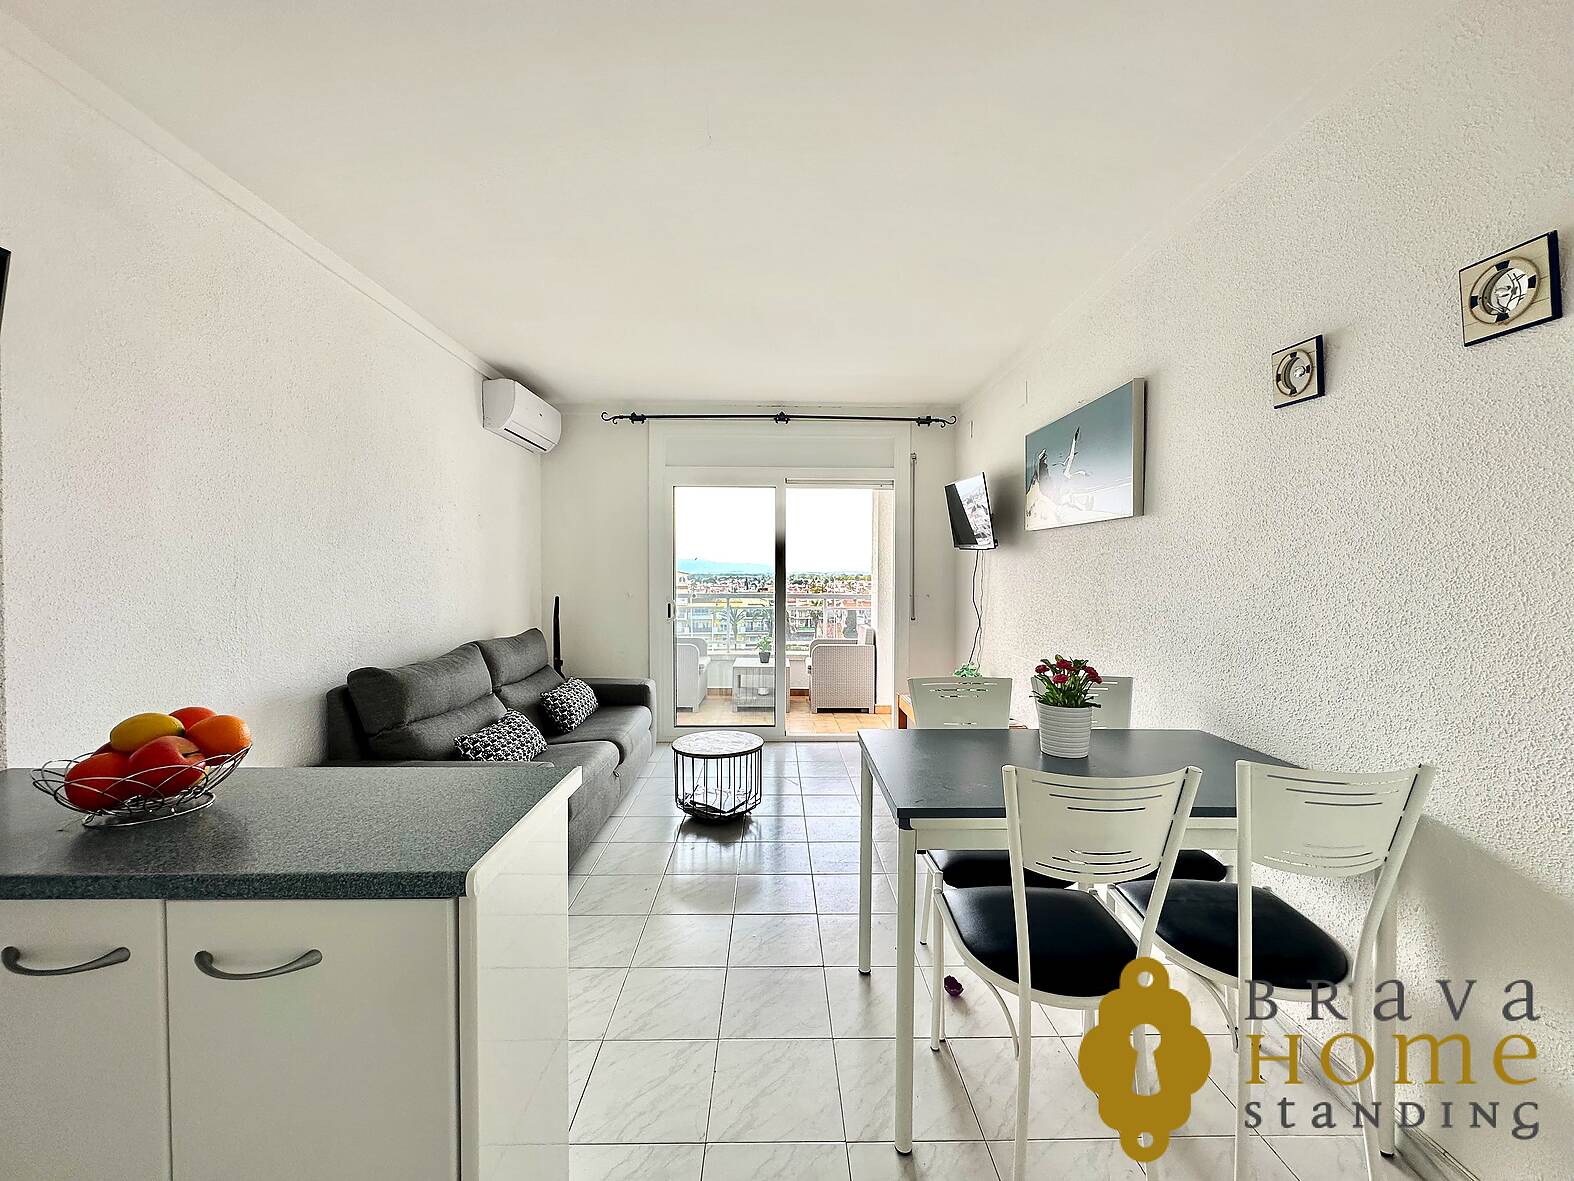 Beautiful apartment overlooking the port of Empuriabrava, for sale